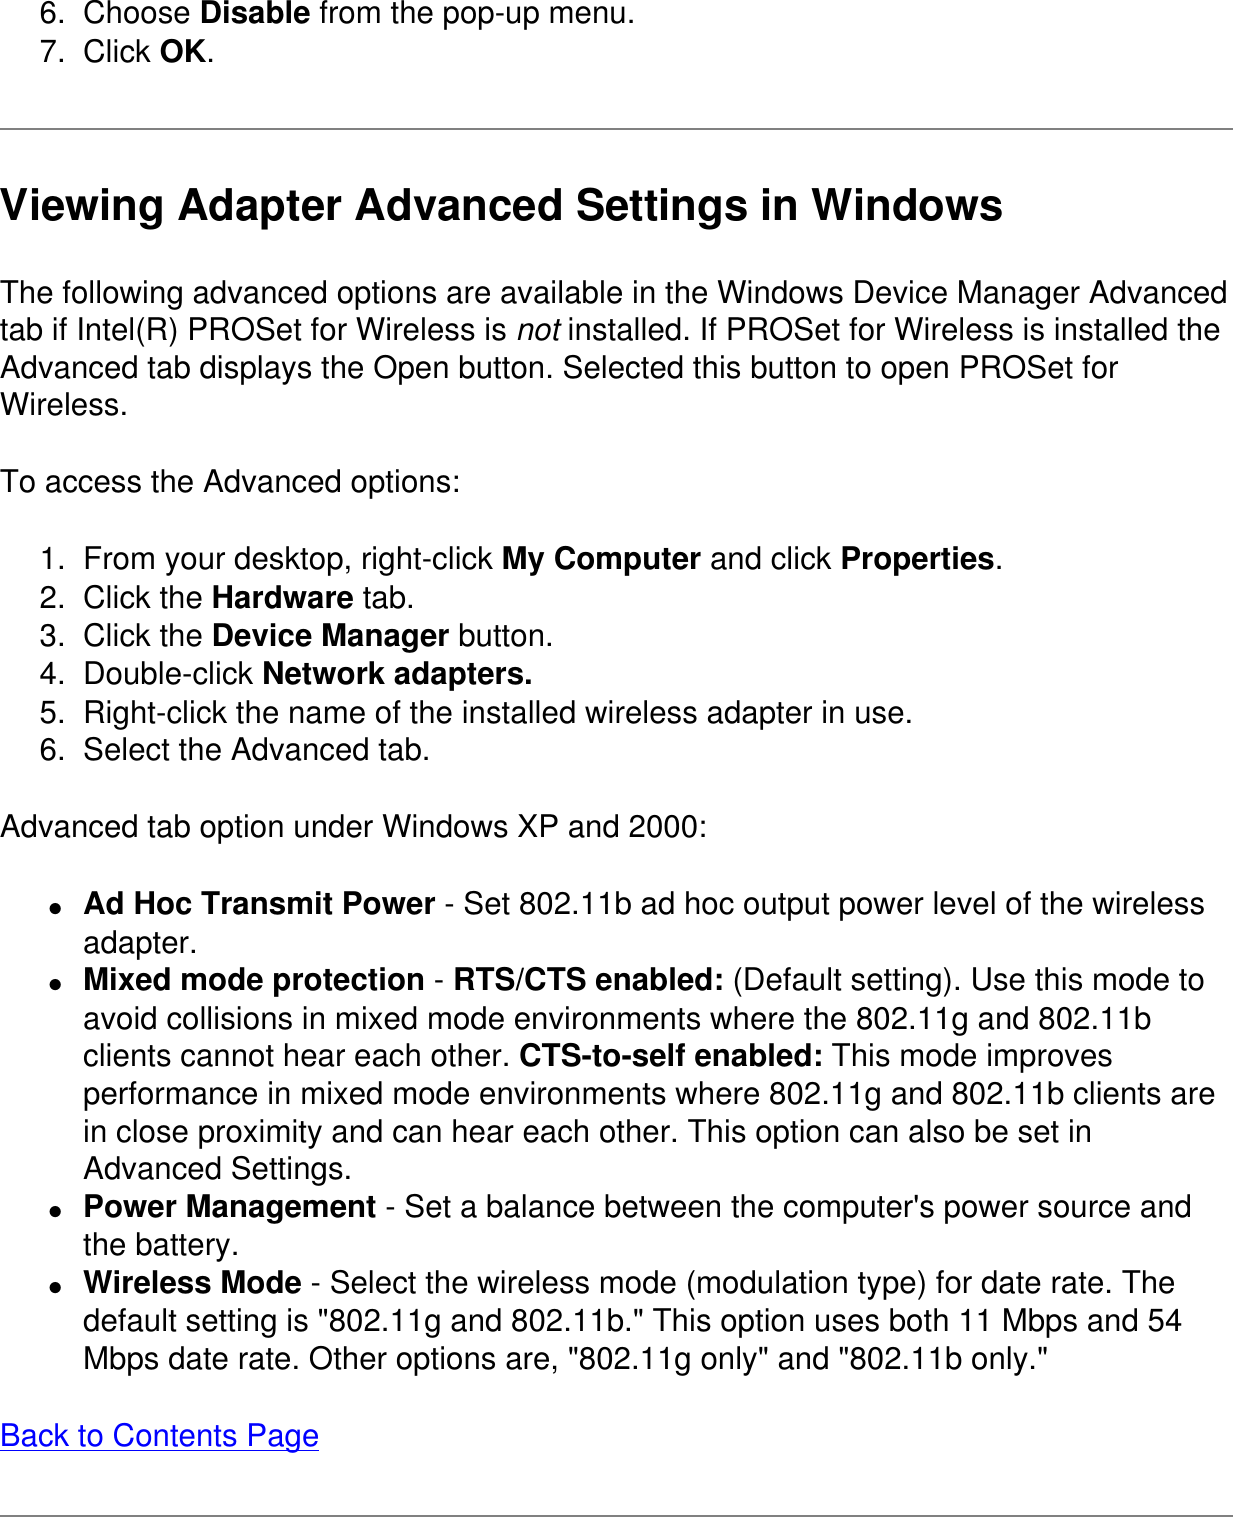 6.  Choose Disable from the pop-up menu.7.  Click OK.Viewing Adapter Advanced Settings in WindowsThe following advanced options are available in the Windows Device Manager Advanced tab if Intel(R) PROSet for Wireless is not installed. If PROSet for Wireless is installed the Advanced tab displays the Open button. Selected this button to open PROSet for Wireless.To access the Advanced options:1.  From your desktop, right-click My Computer and click Properties.2.  Click the Hardware tab.3.  Click the Device Manager button.4.  Double-click Network adapters.5.  Right-click the name of the installed wireless adapter in use.6.  Select the Advanced tab.Advanced tab option under Windows XP and 2000:●     Ad Hoc Transmit Power - Set 802.11b ad hoc output power level of the wireless adapter.●     Mixed mode protection - RTS/CTS enabled: (Default setting). Use this mode to avoid collisions in mixed mode environments where the 802.11g and 802.11b clients cannot hear each other. CTS-to-self enabled: This mode improves performance in mixed mode environments where 802.11g and 802.11b clients are in close proximity and can hear each other. This option can also be set in Advanced Settings.●     Power Management - Set a balance between the computer&apos;s power source and the battery.●     Wireless Mode - Select the wireless mode (modulation type) for date rate. The default setting is &quot;802.11g and 802.11b.&quot; This option uses both 11 Mbps and 54 Mbps date rate. Other options are, &quot;802.11g only&quot; and &quot;802.11b only.&quot;Back to Contents Page